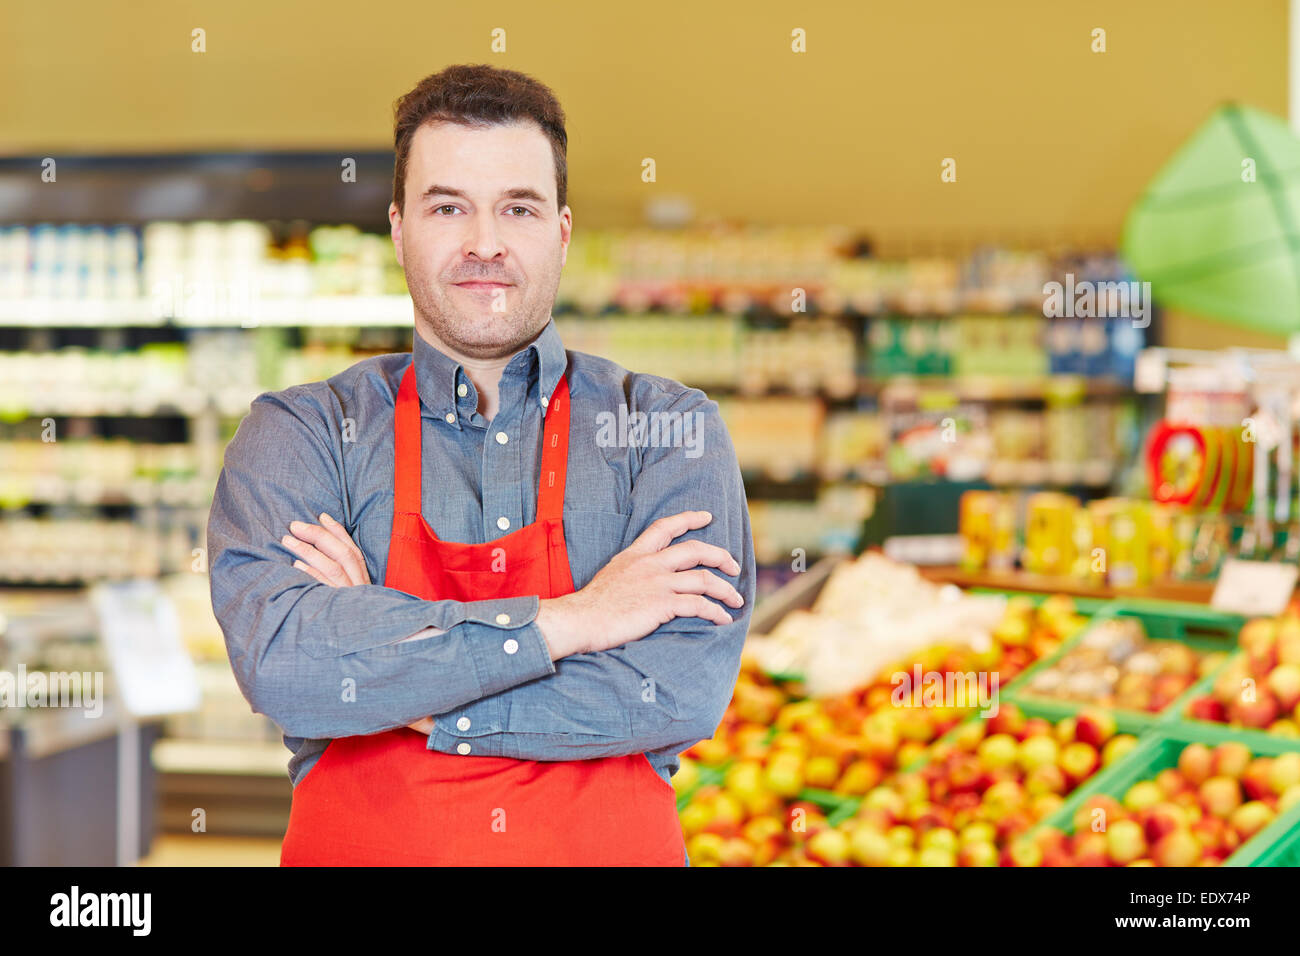 Store manager standing with his arms crossed in a supermarket Stock Photo